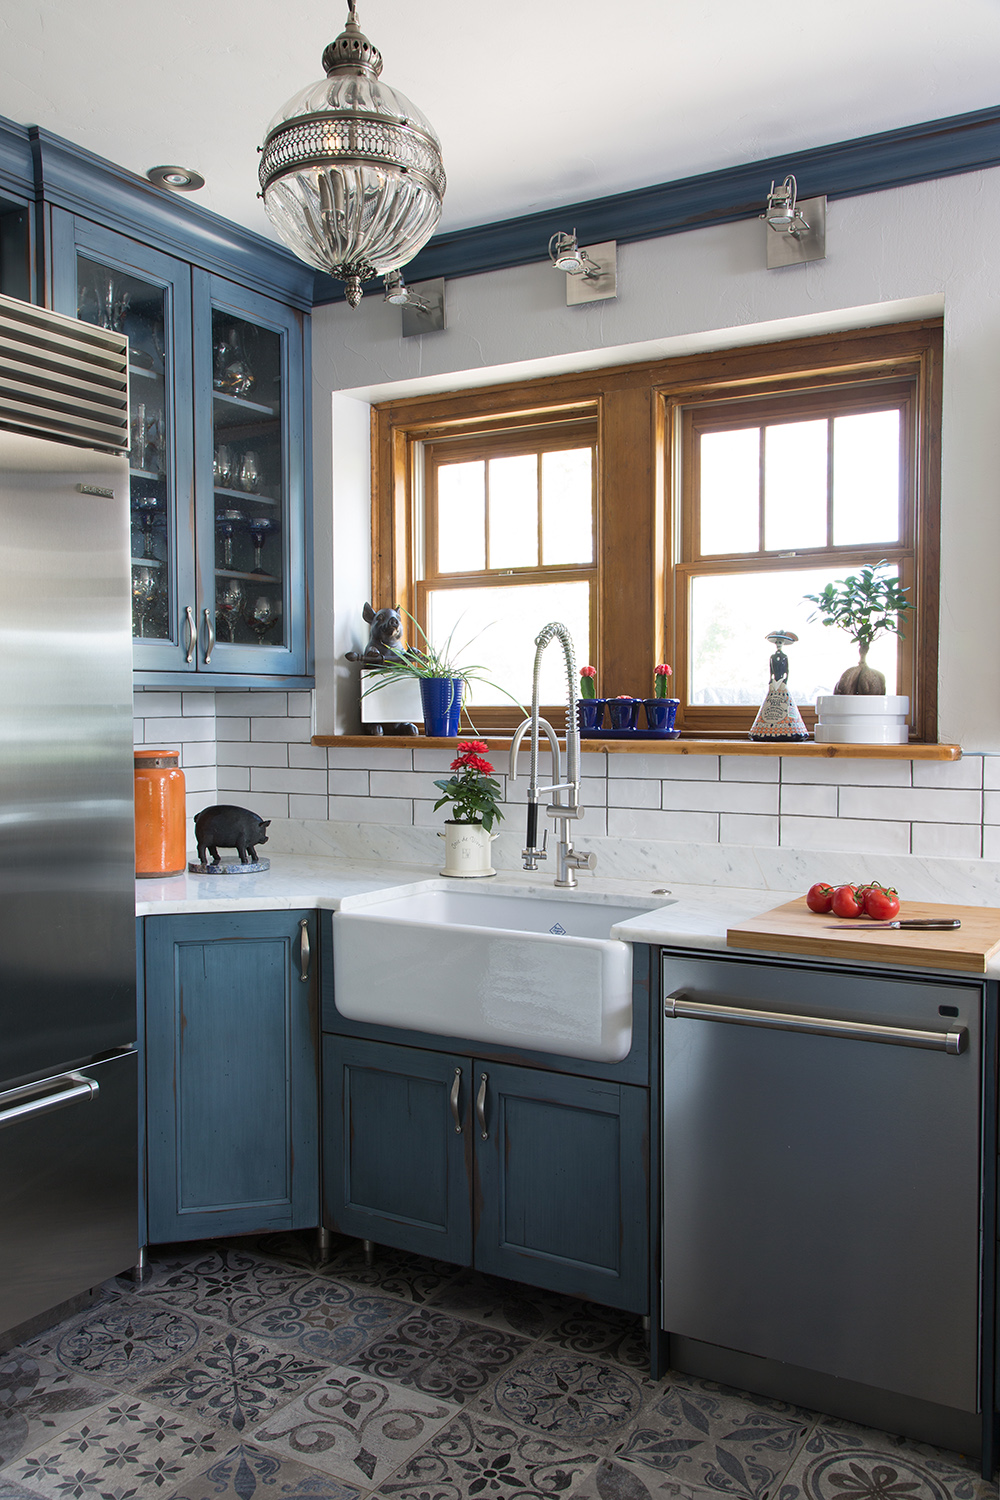 Custom-made cabinets in blue for modern kitchen design by William Ohs in Denver